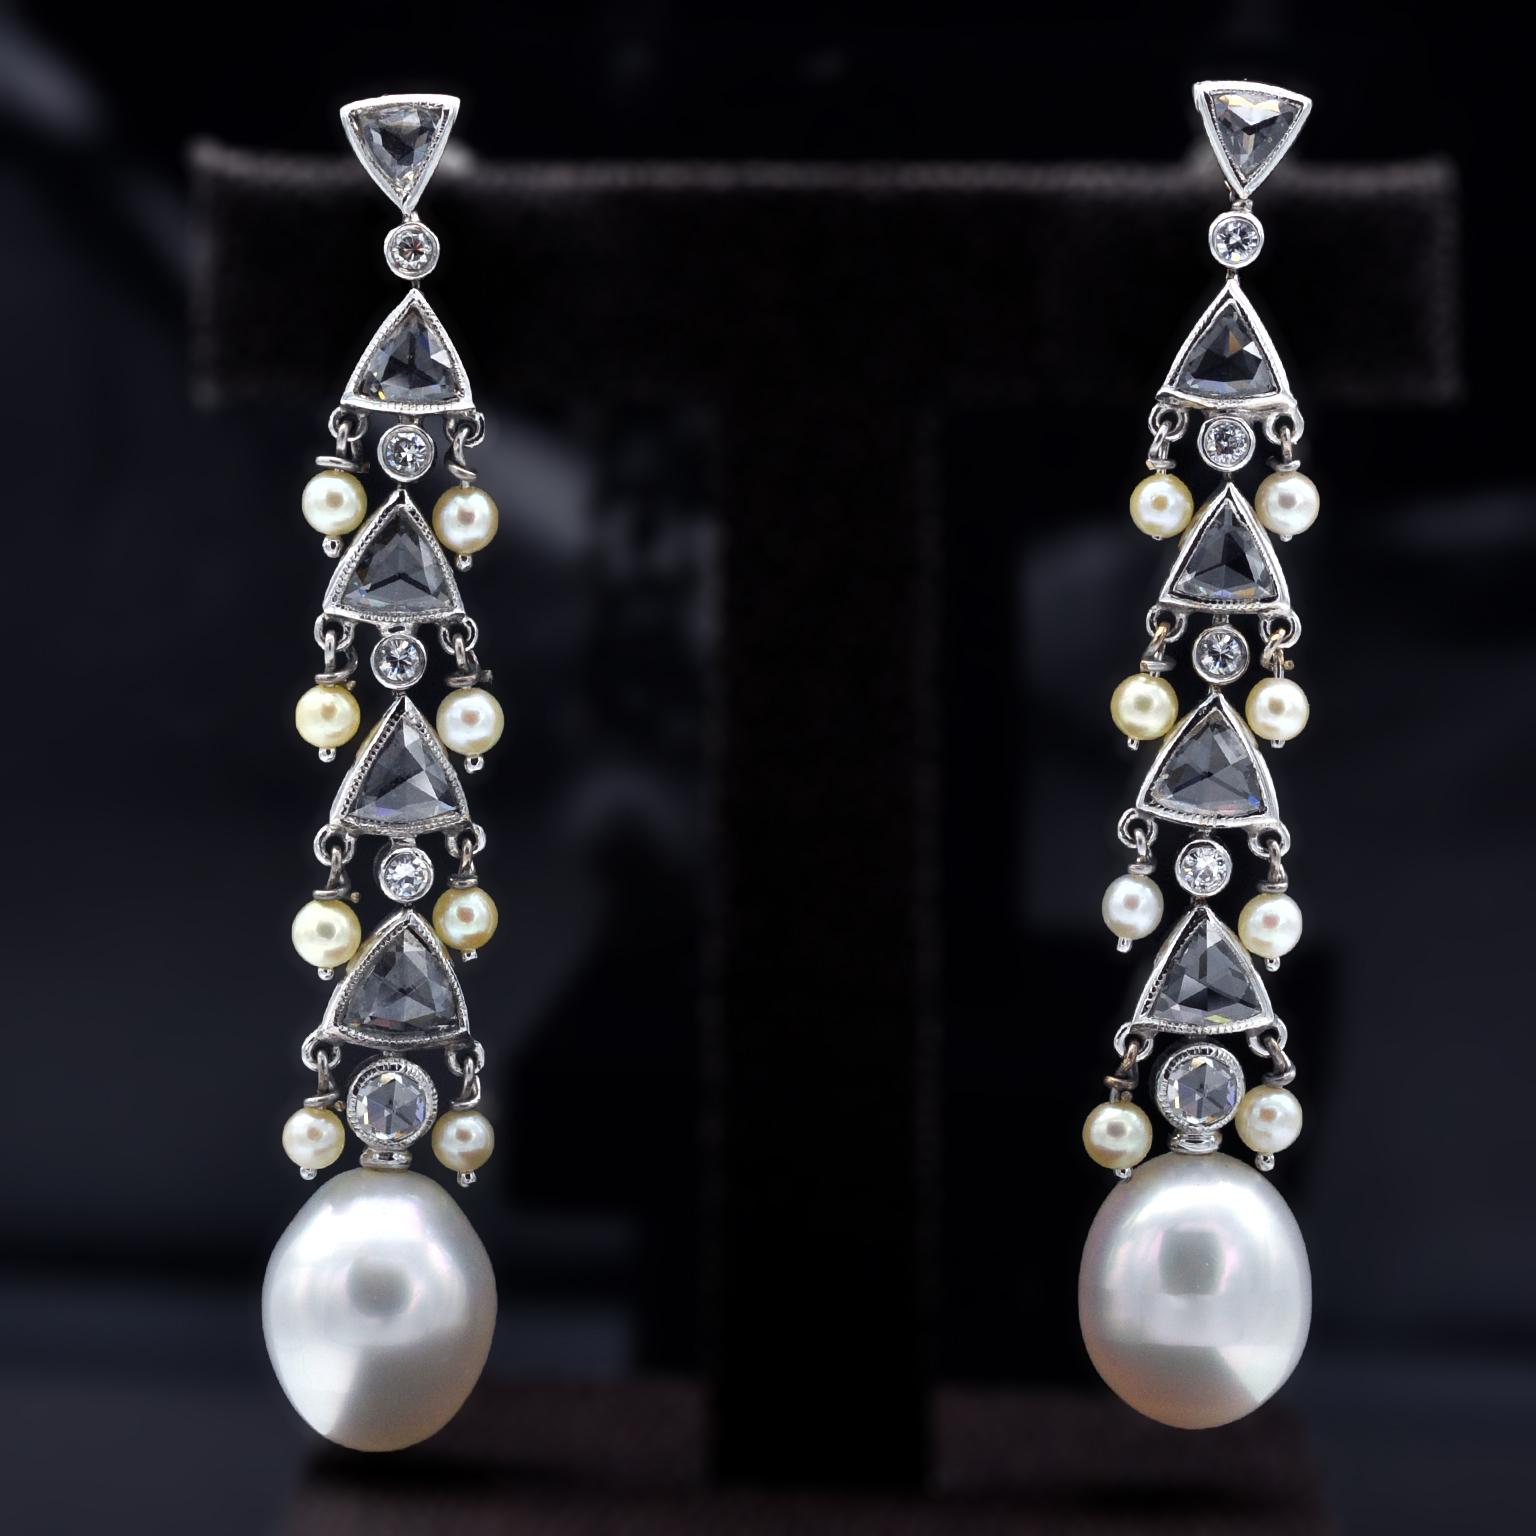 Classy One-of-a-kind chandelier Drop Earring: an egg shaped south-sea pearl hangs down a series of triangular rose cut diamonds from the sides of which dangle small round pearls. some full cut diamonds highlight the whole piece. 
A truly striking